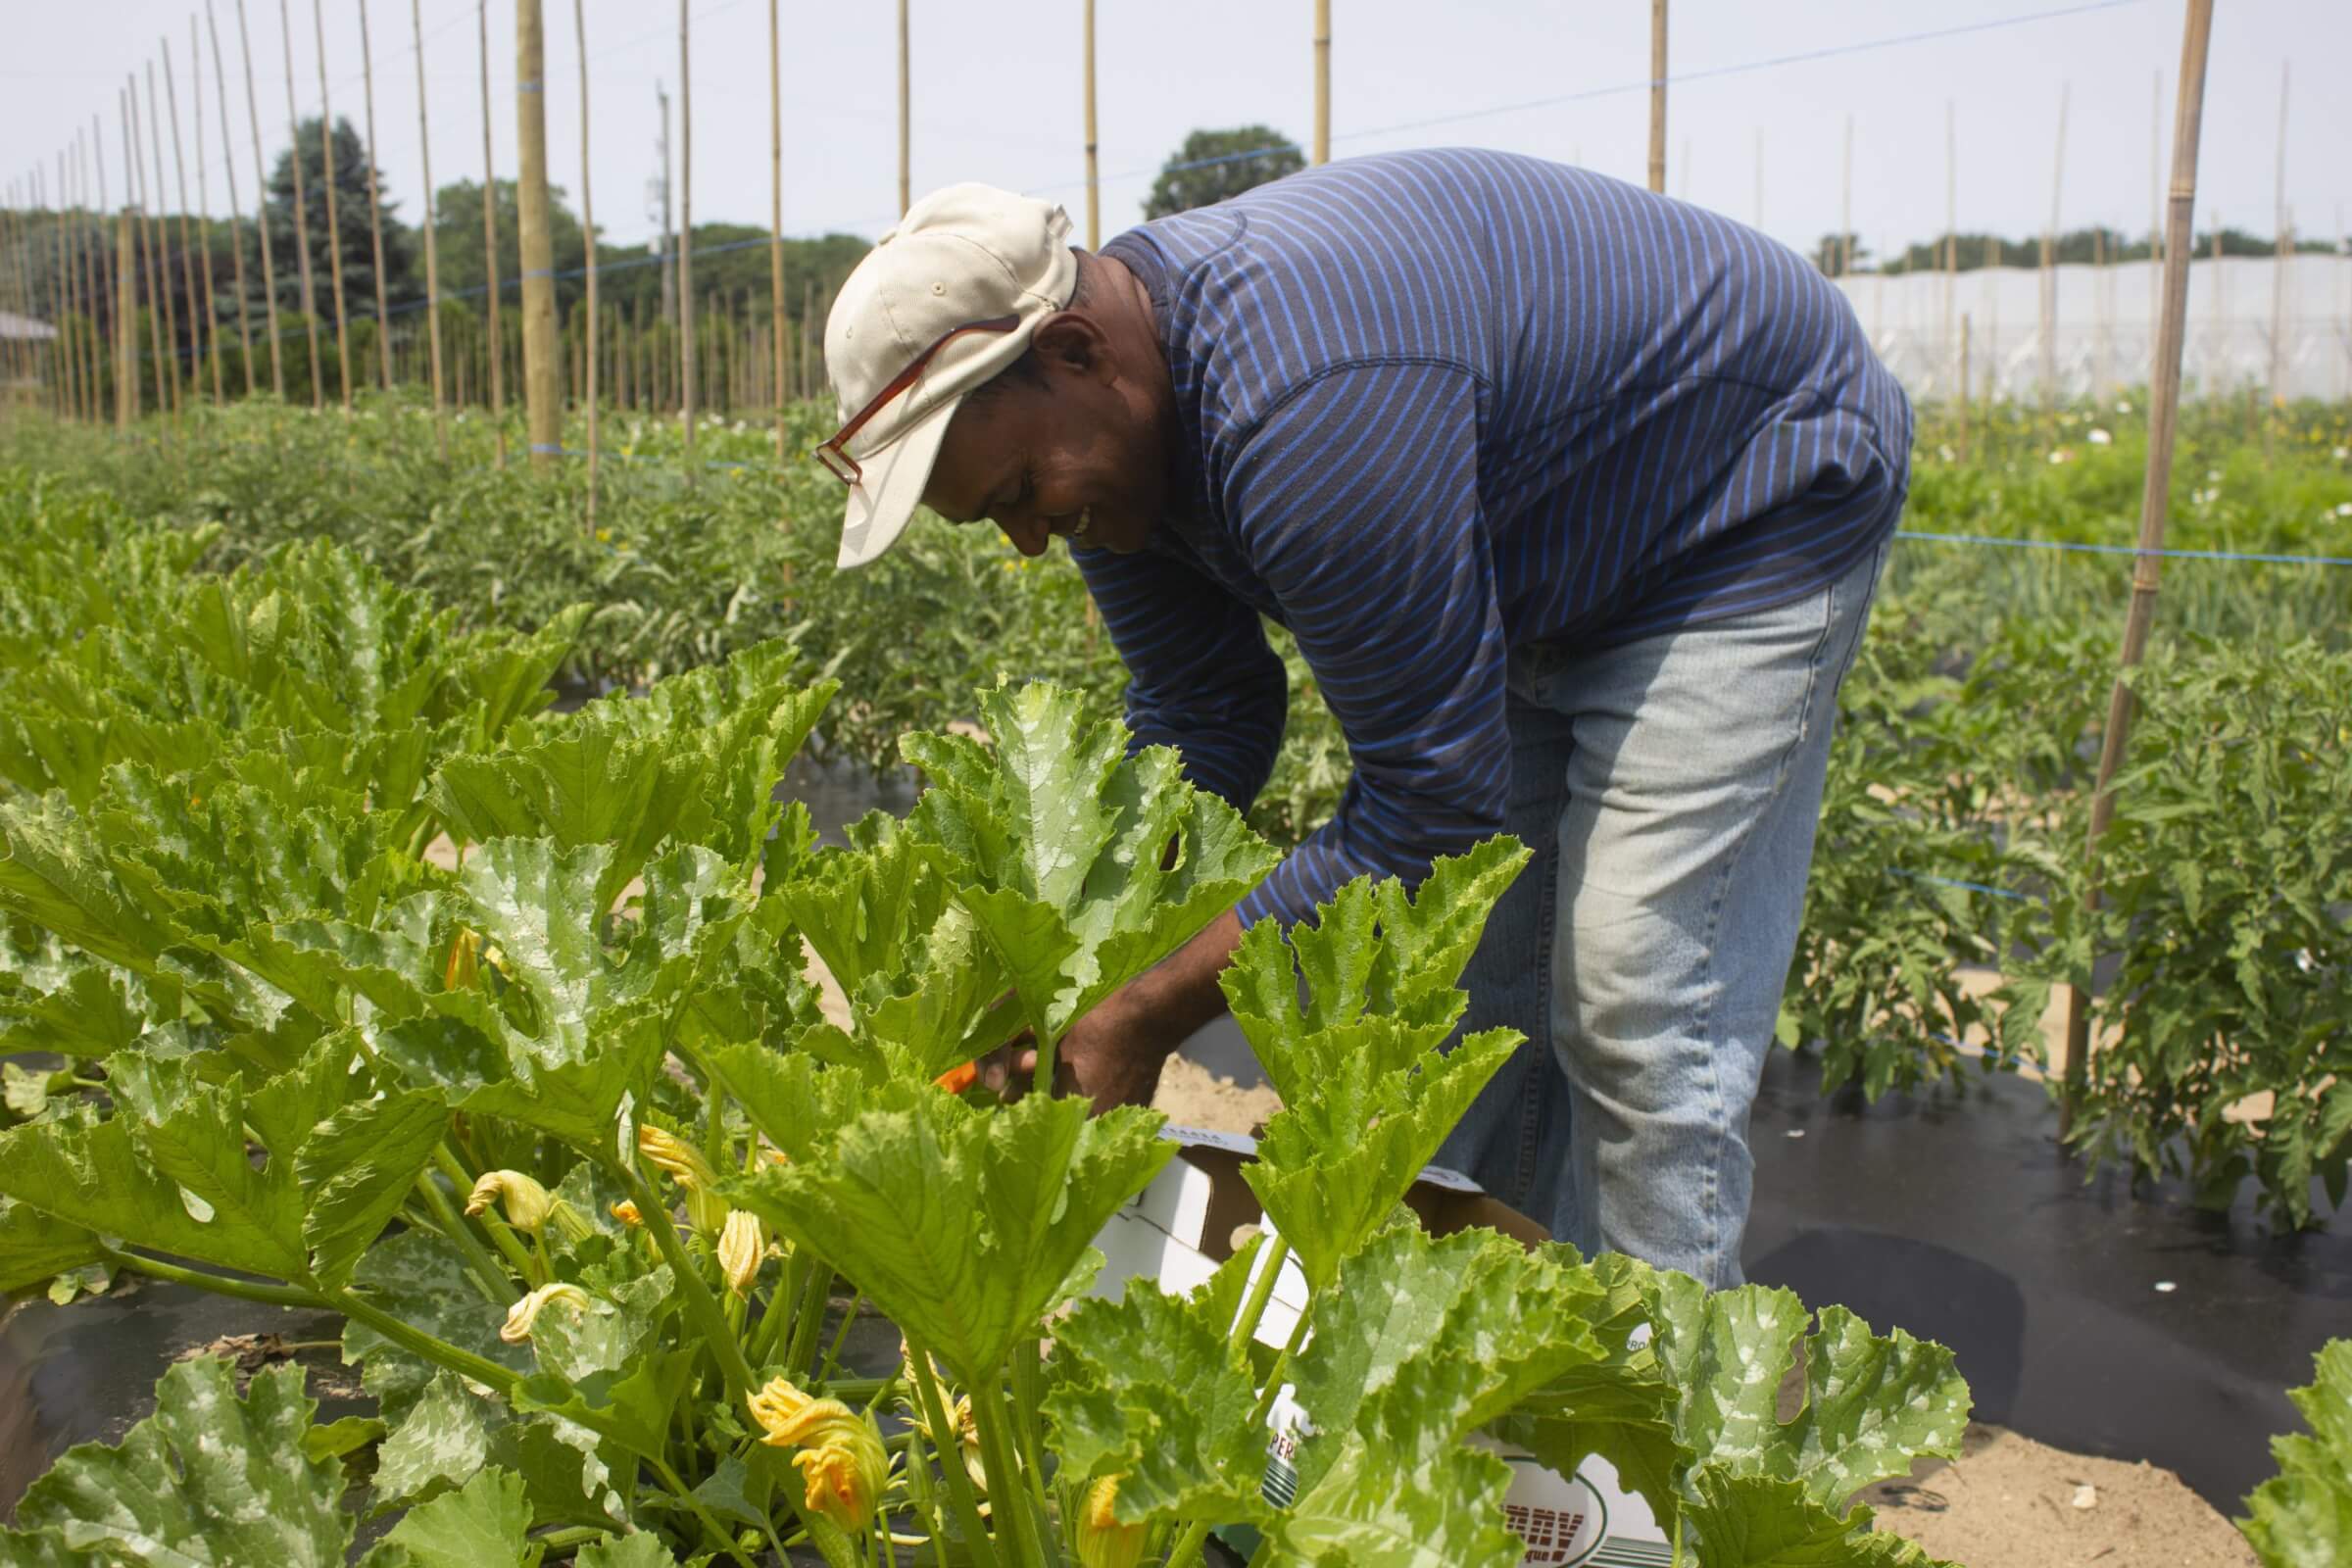 Kishore, Seasonal Agricultural Worker from Trinidad and Tobago